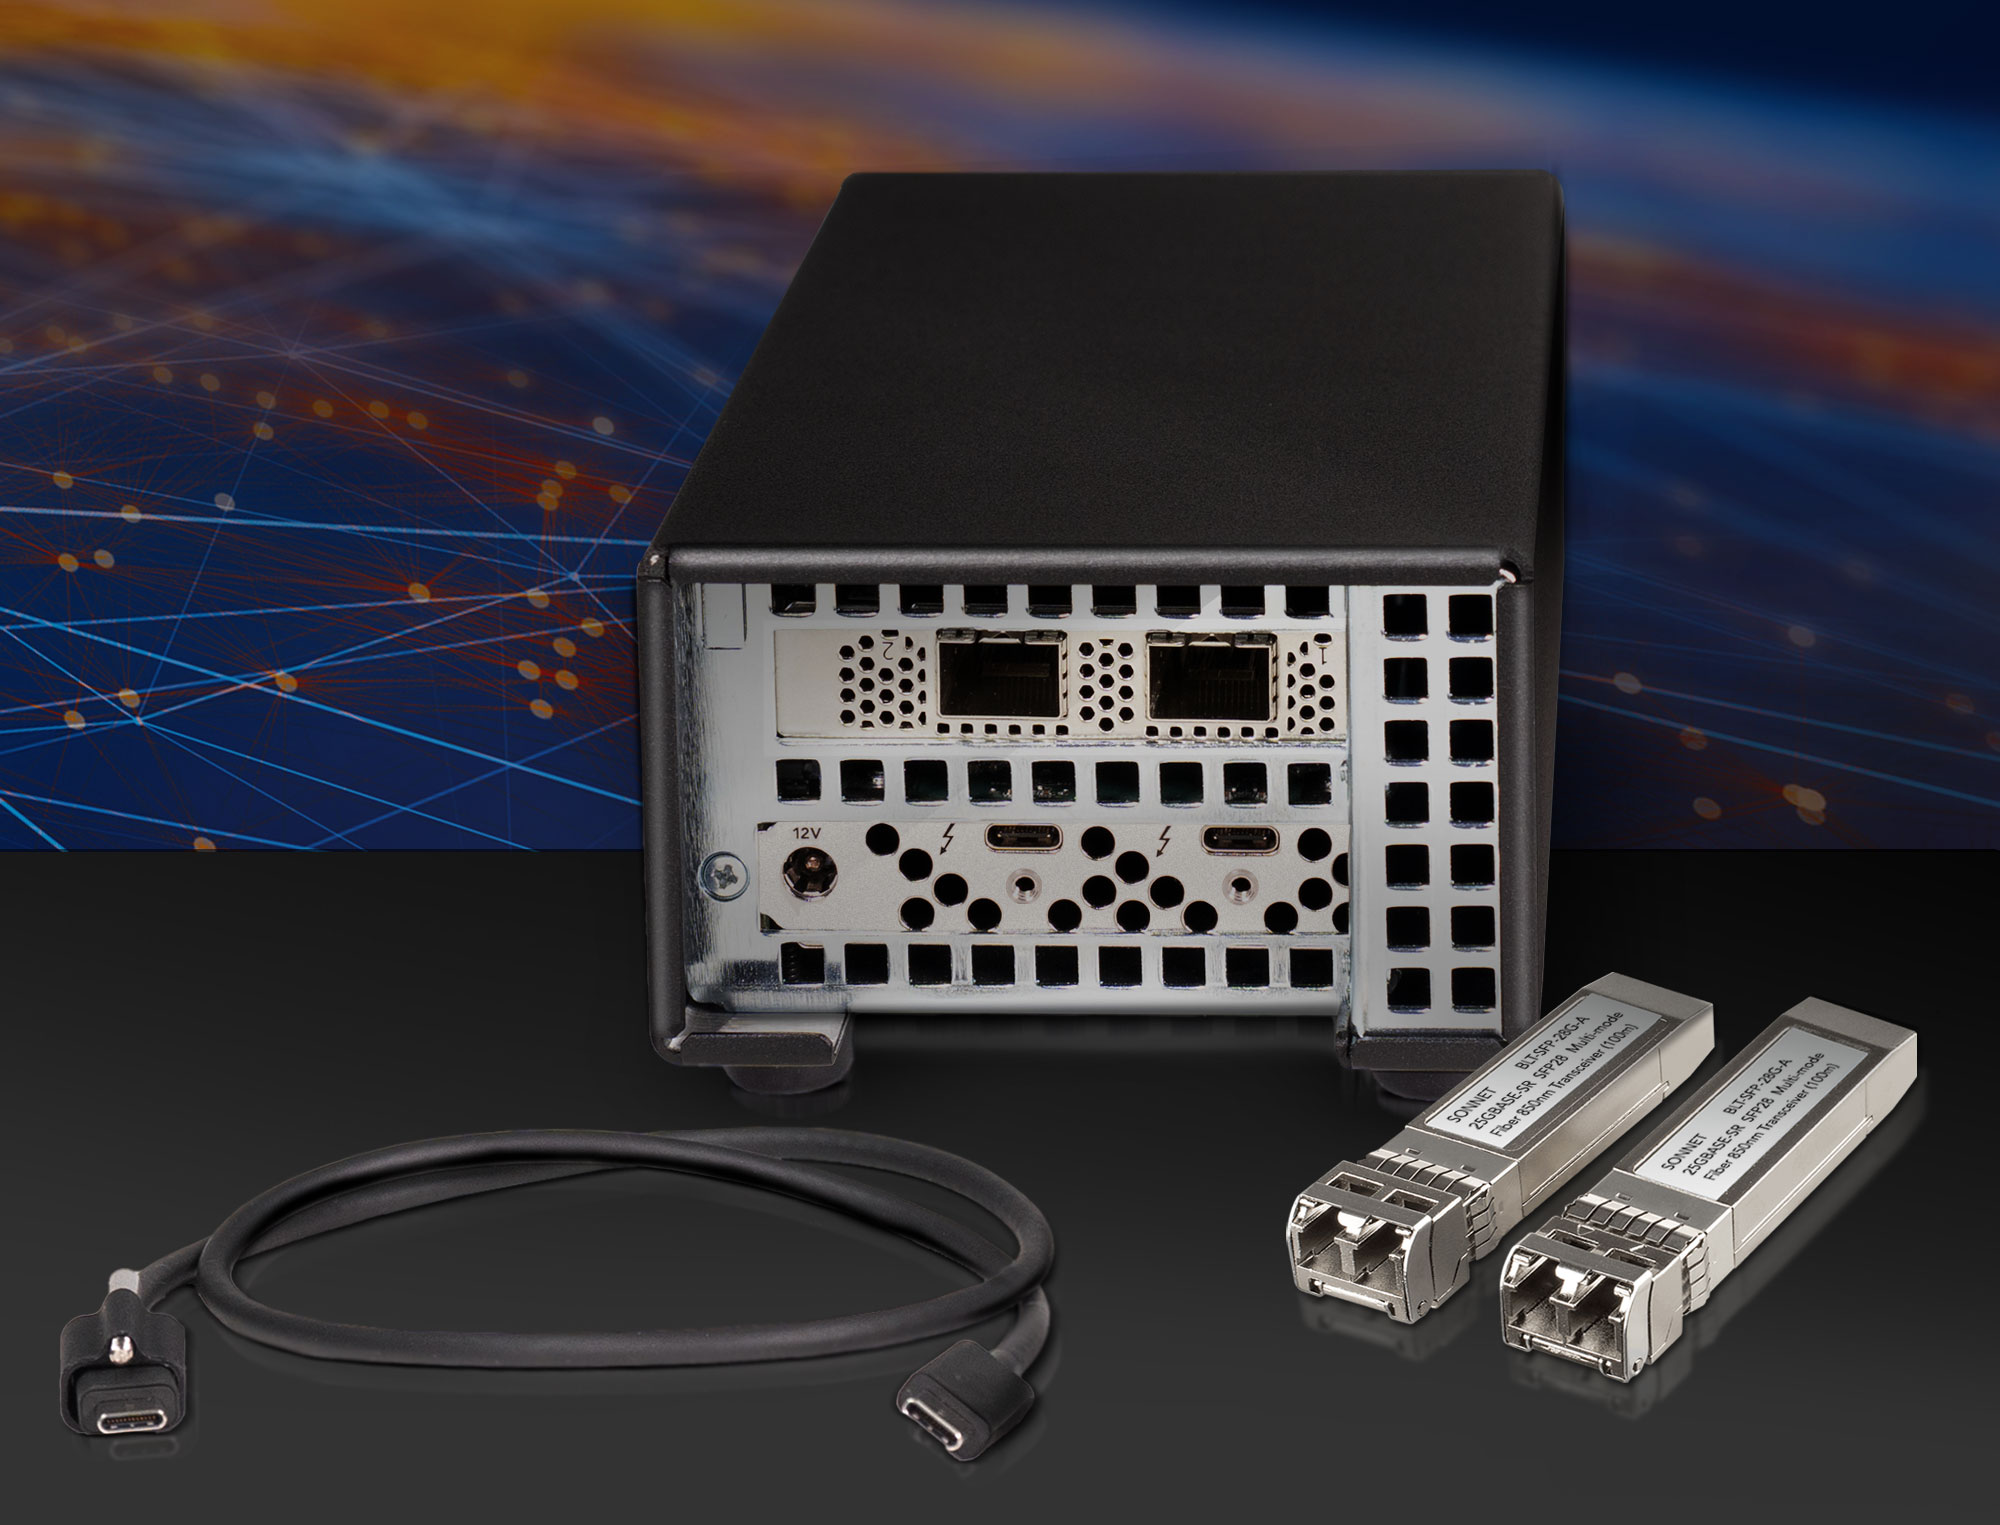 Networking Globe with Twin25G, SFP28 Transceivers, and Thunderbolt Cable